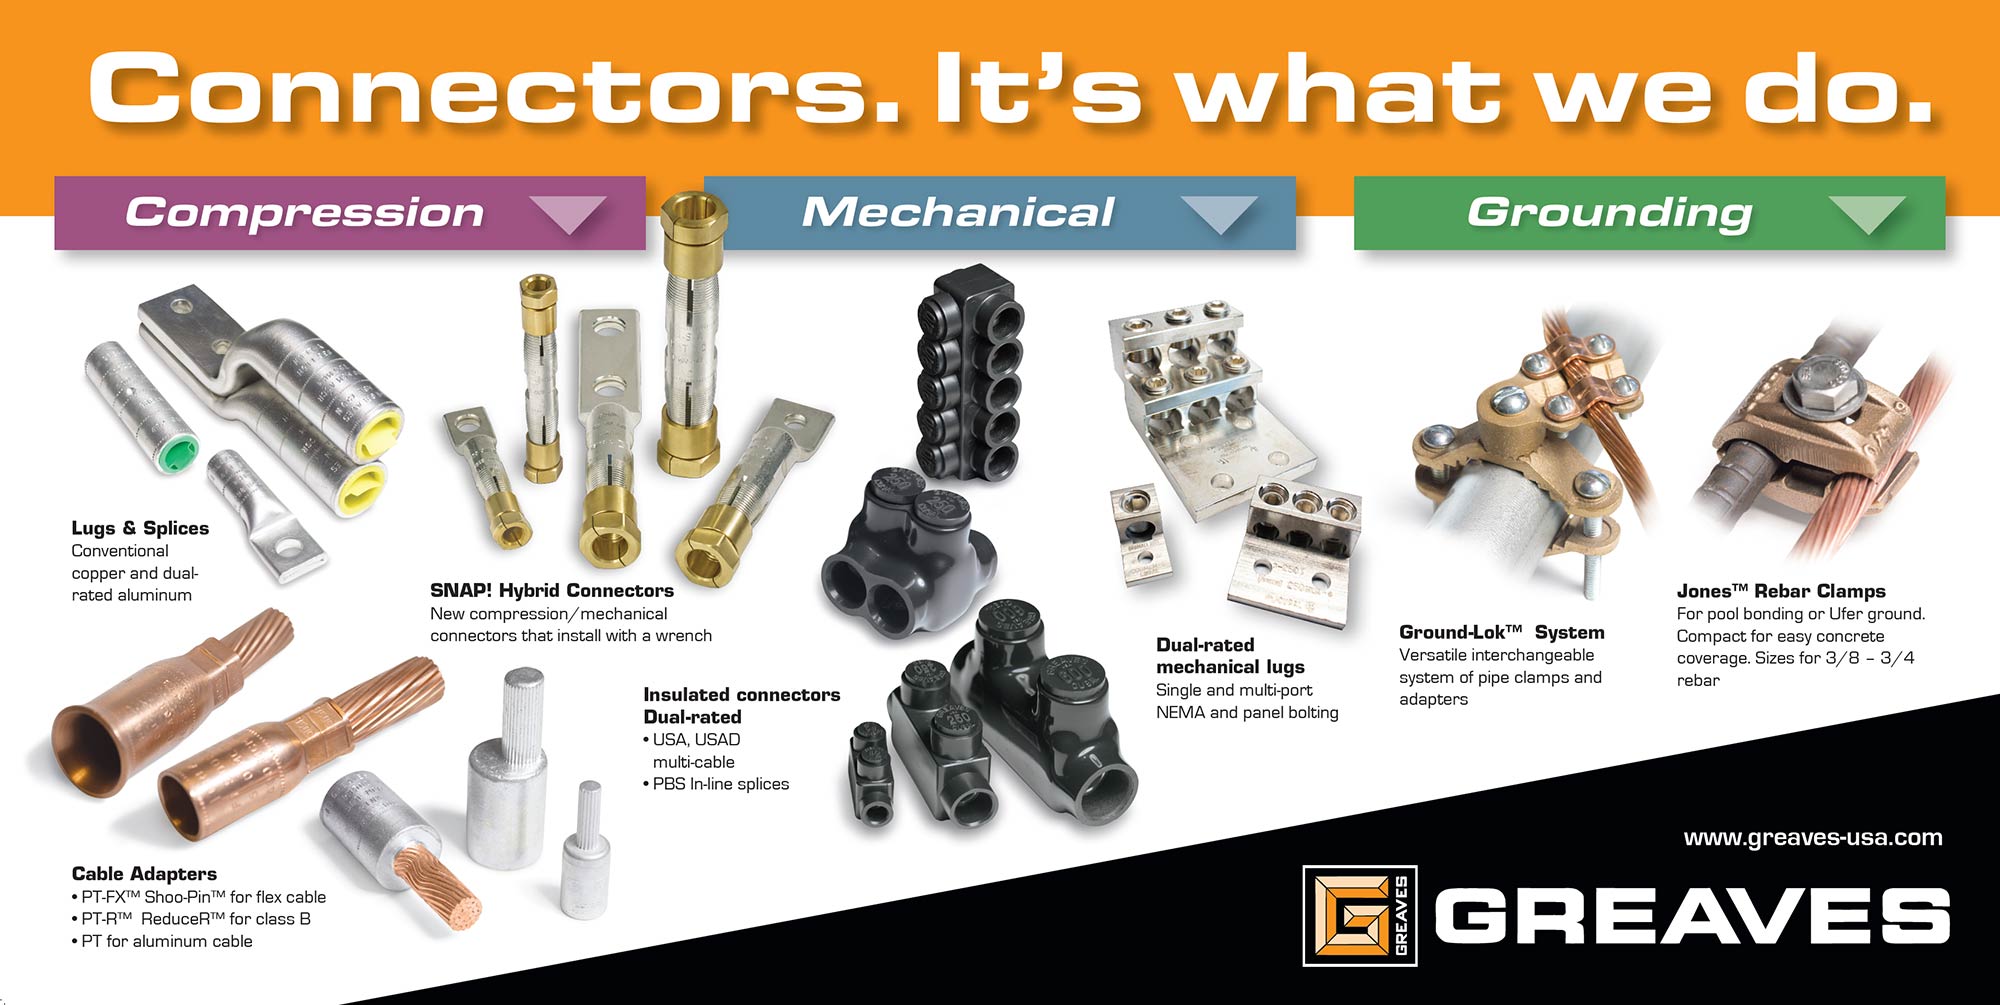 Greaves: Compression, Mechanical & Grounding Connectors